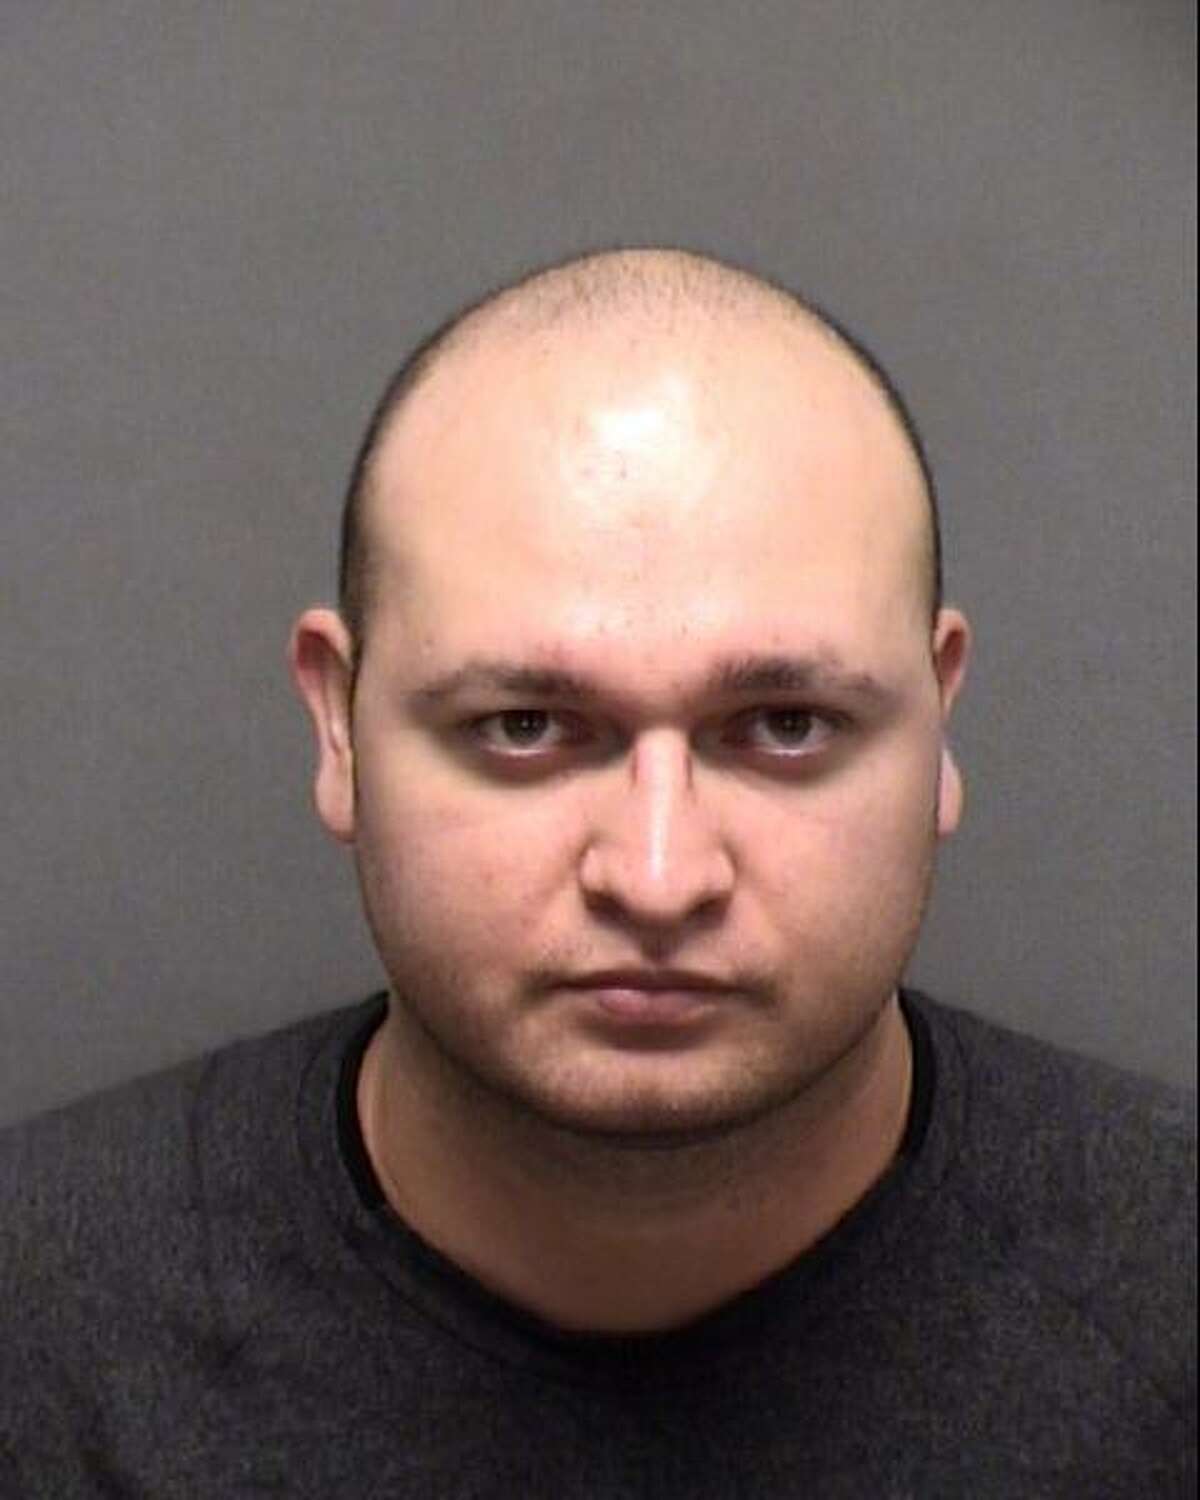 Armando Trevino, a deputy with the Bexar County Sheriff’s Office, was arrested in May and faces charges related to bribery and smuggling heroin and Suboxone into the Bexar County Adult Detention Center.